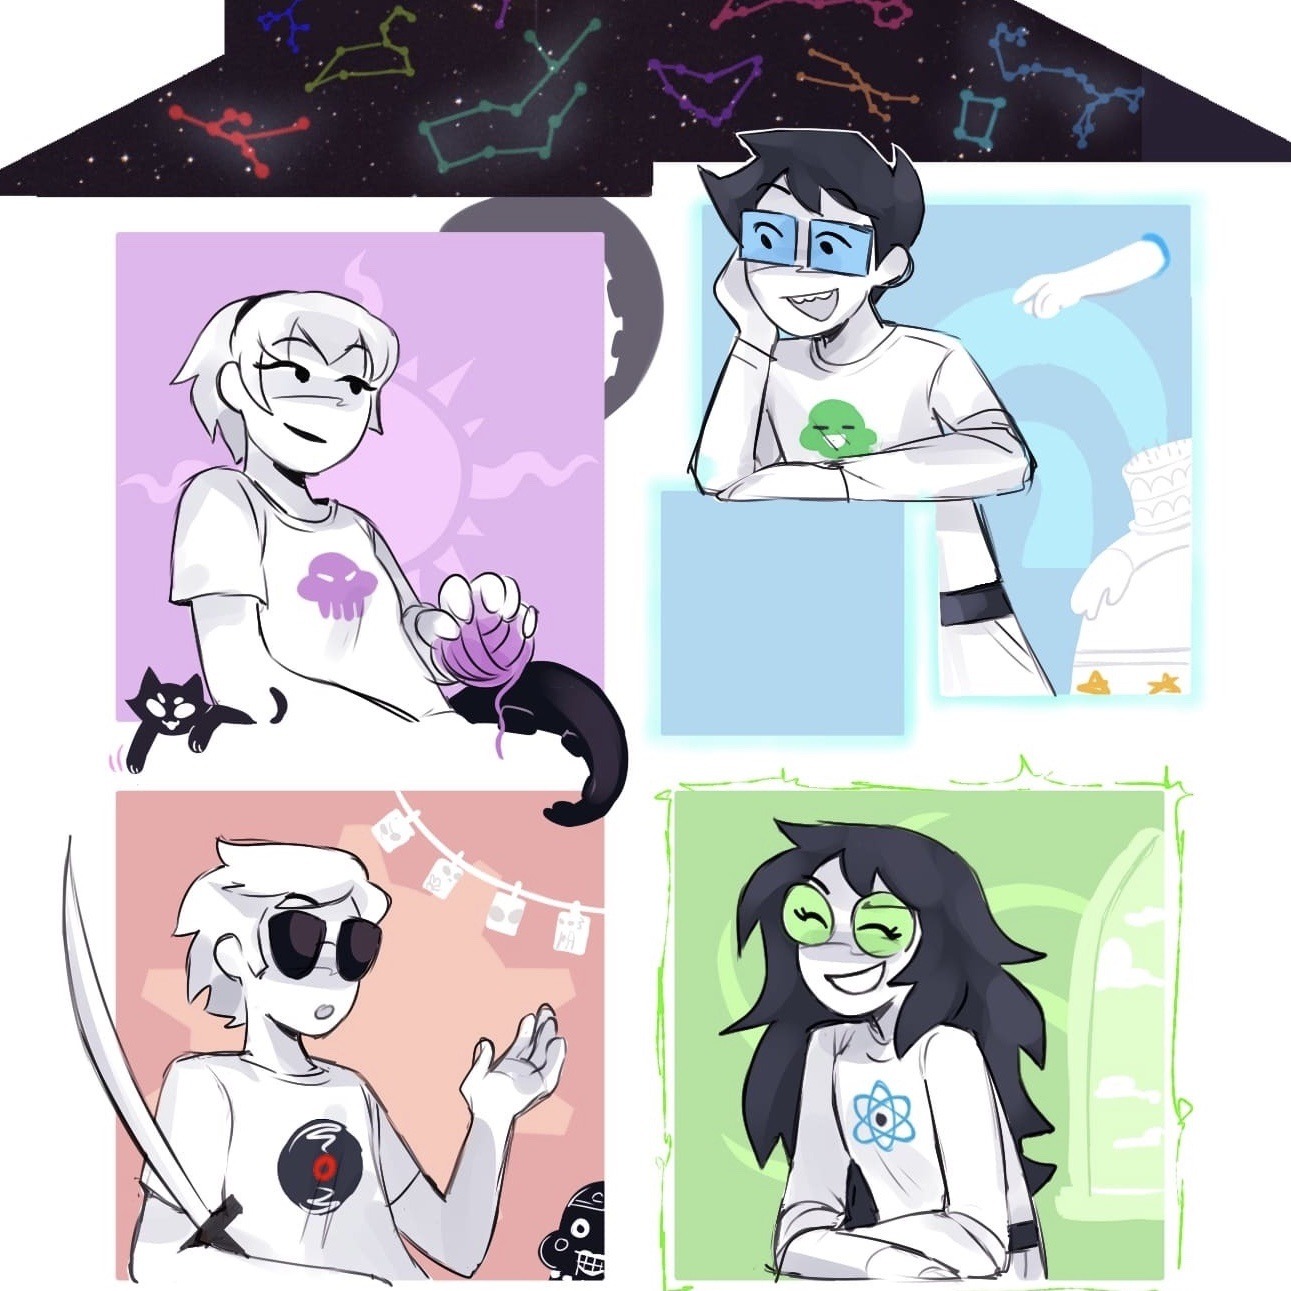 proshippersstimming:Beta OT4 with glowing/shiny things and pouring liquids for anon!💜 💙 💜 / ❤️ 💚 ❤️ / 💙 💜 💙